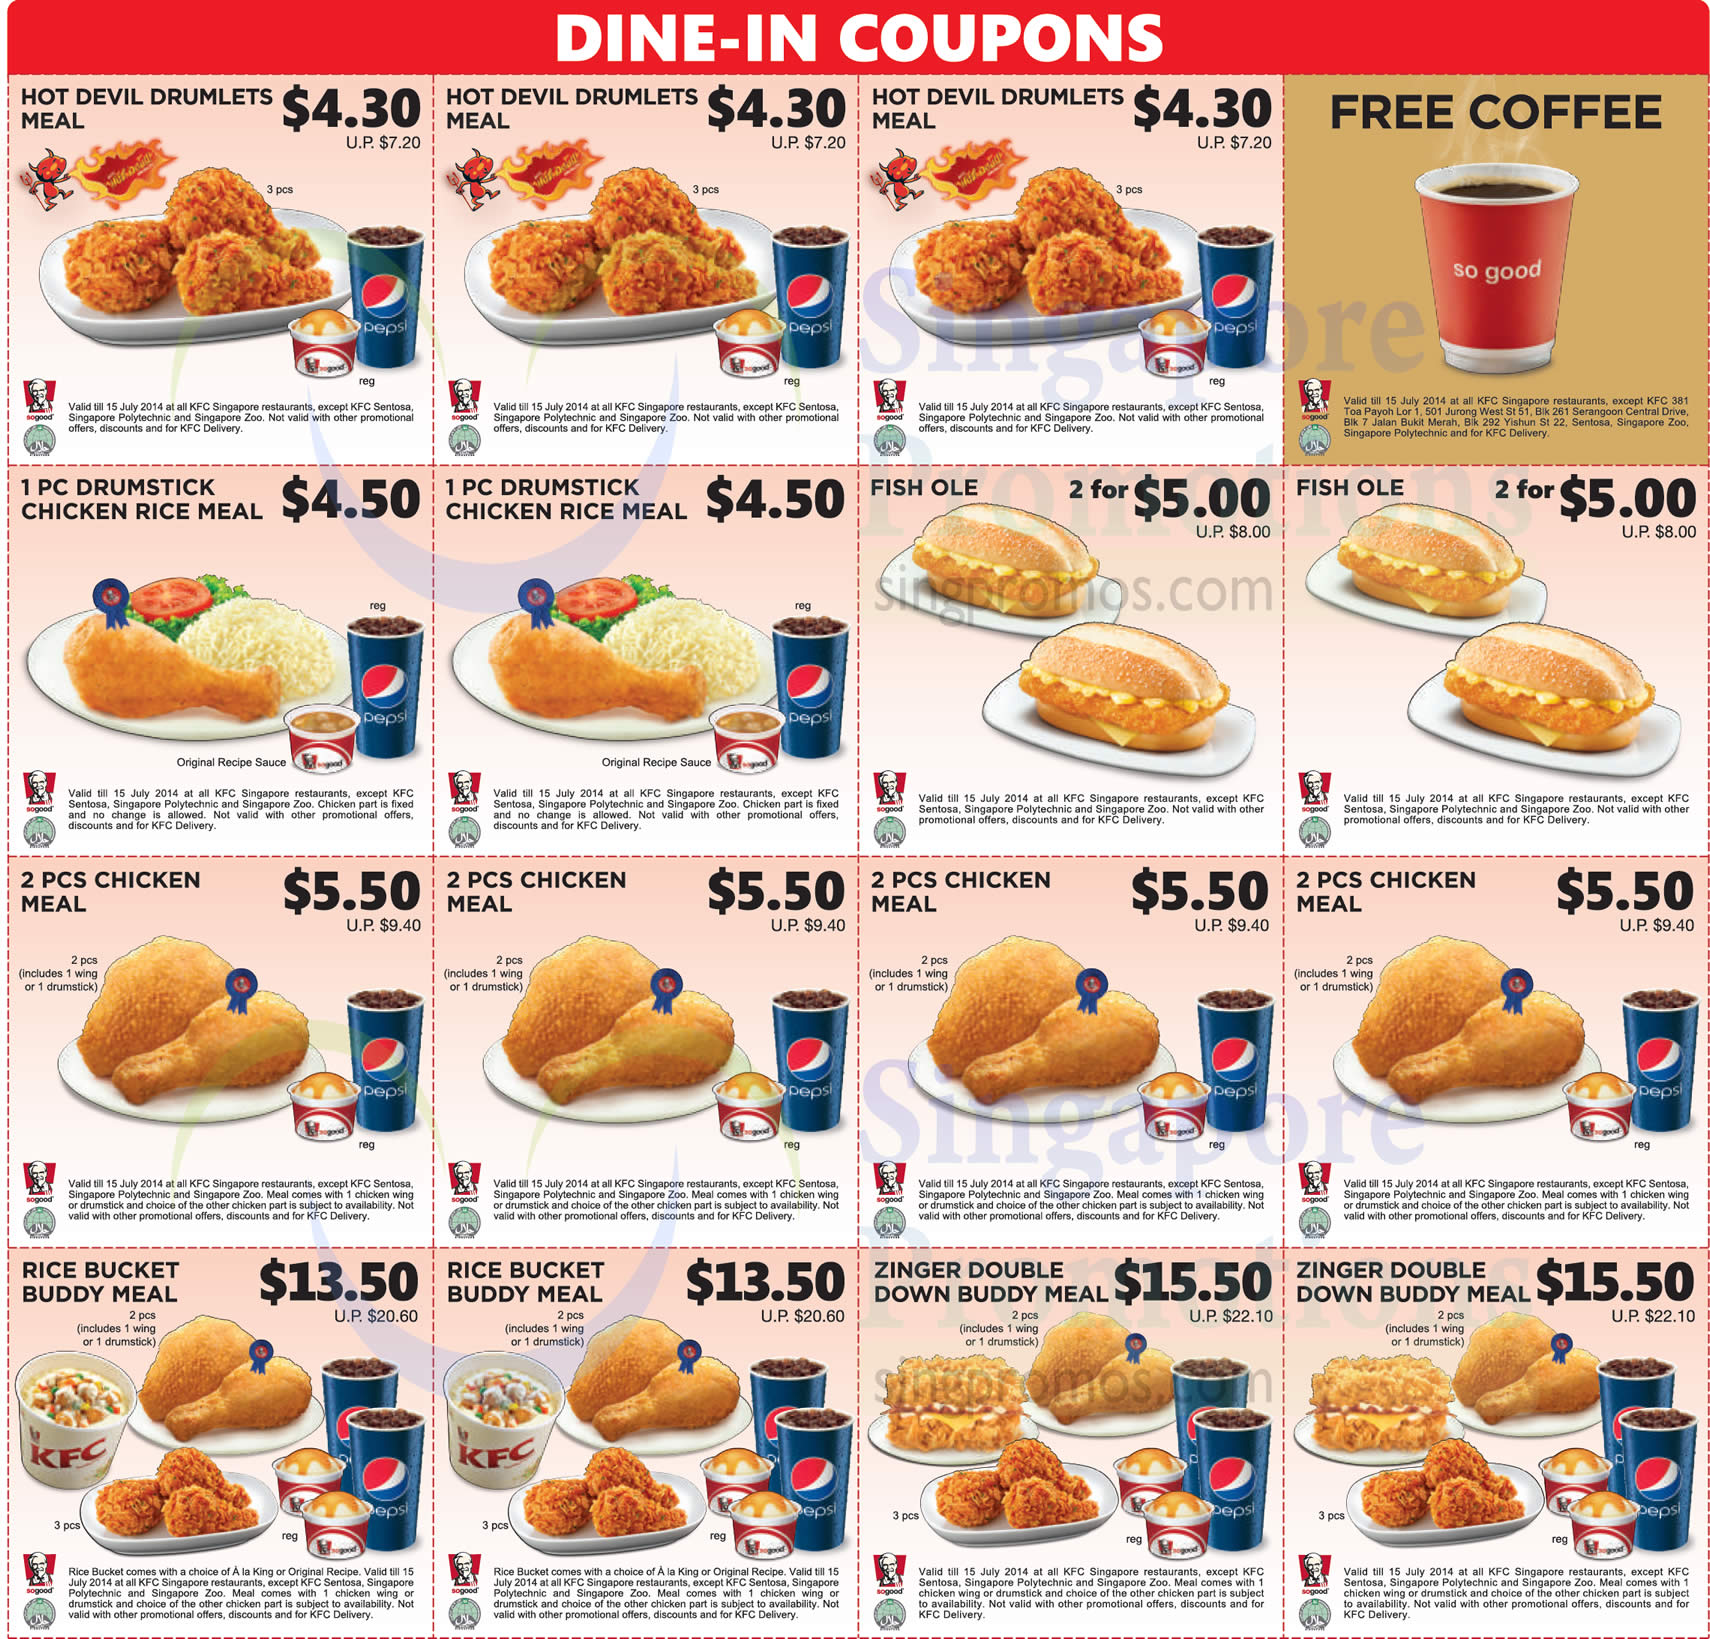 All Dine In Coupons Printable 